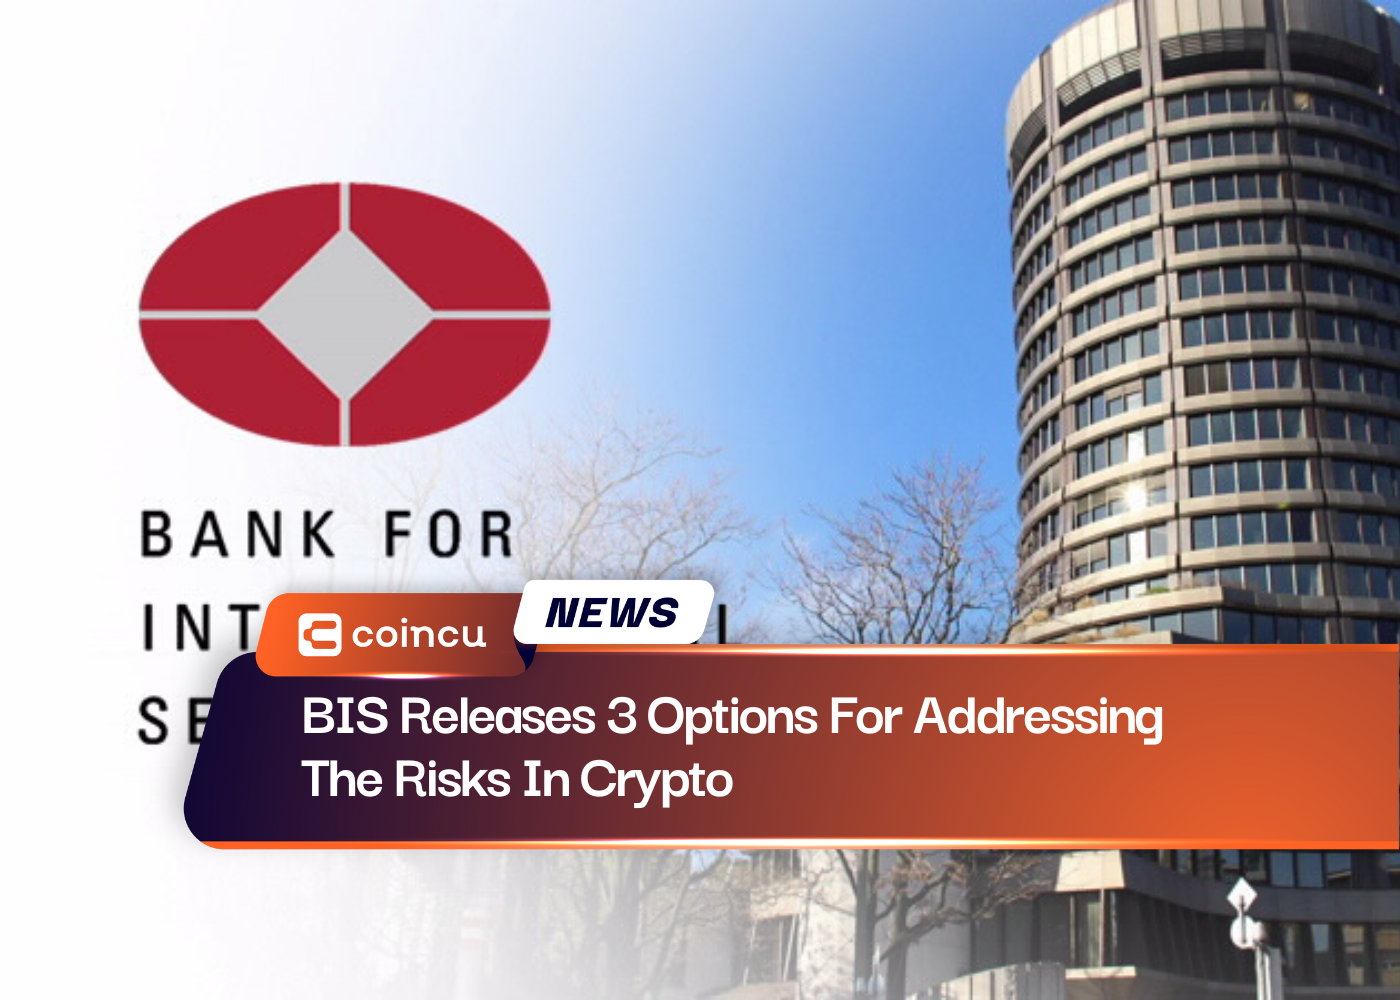 BIS Releases 3 Options For Addressing The Risks In Crypto